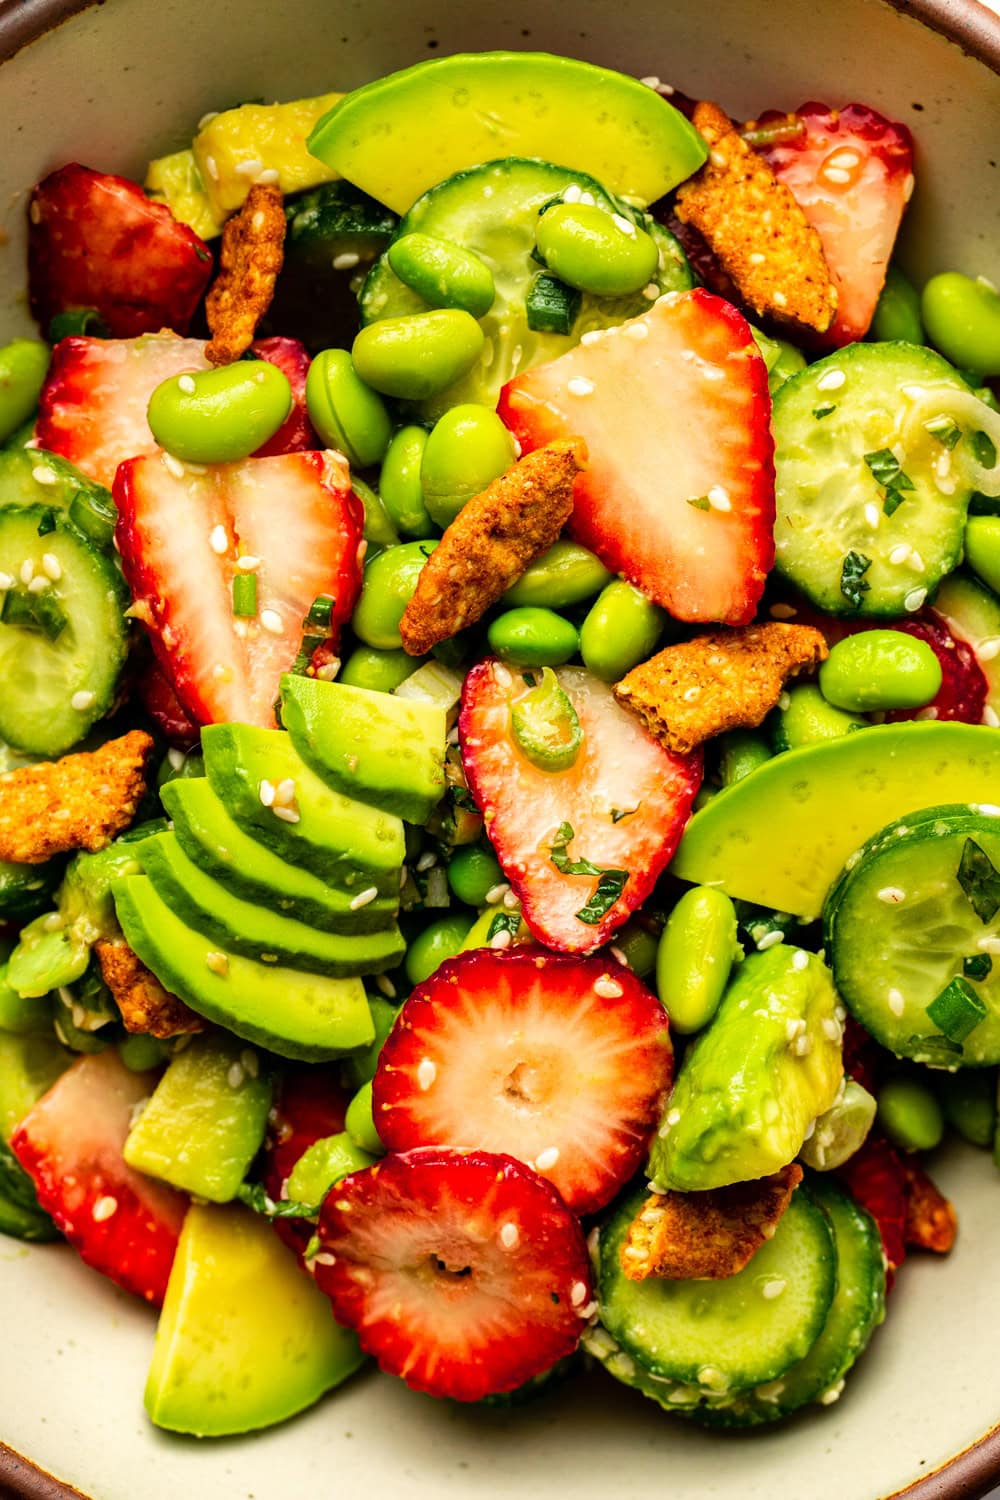 a zoomed in image of the salad showing its texture and the ingredients